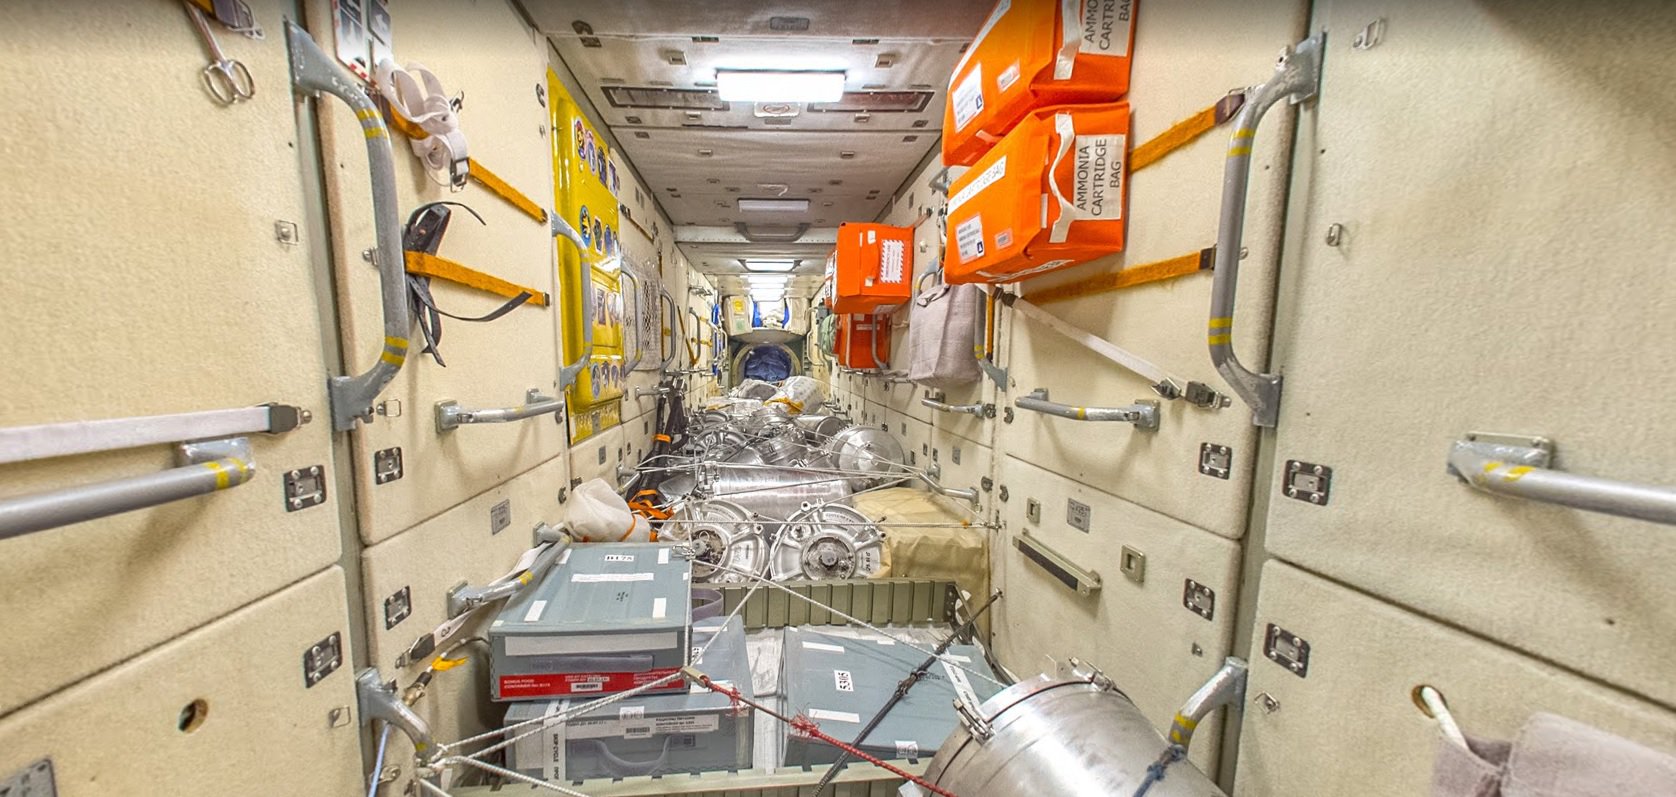 Want to walk inside the International space station?